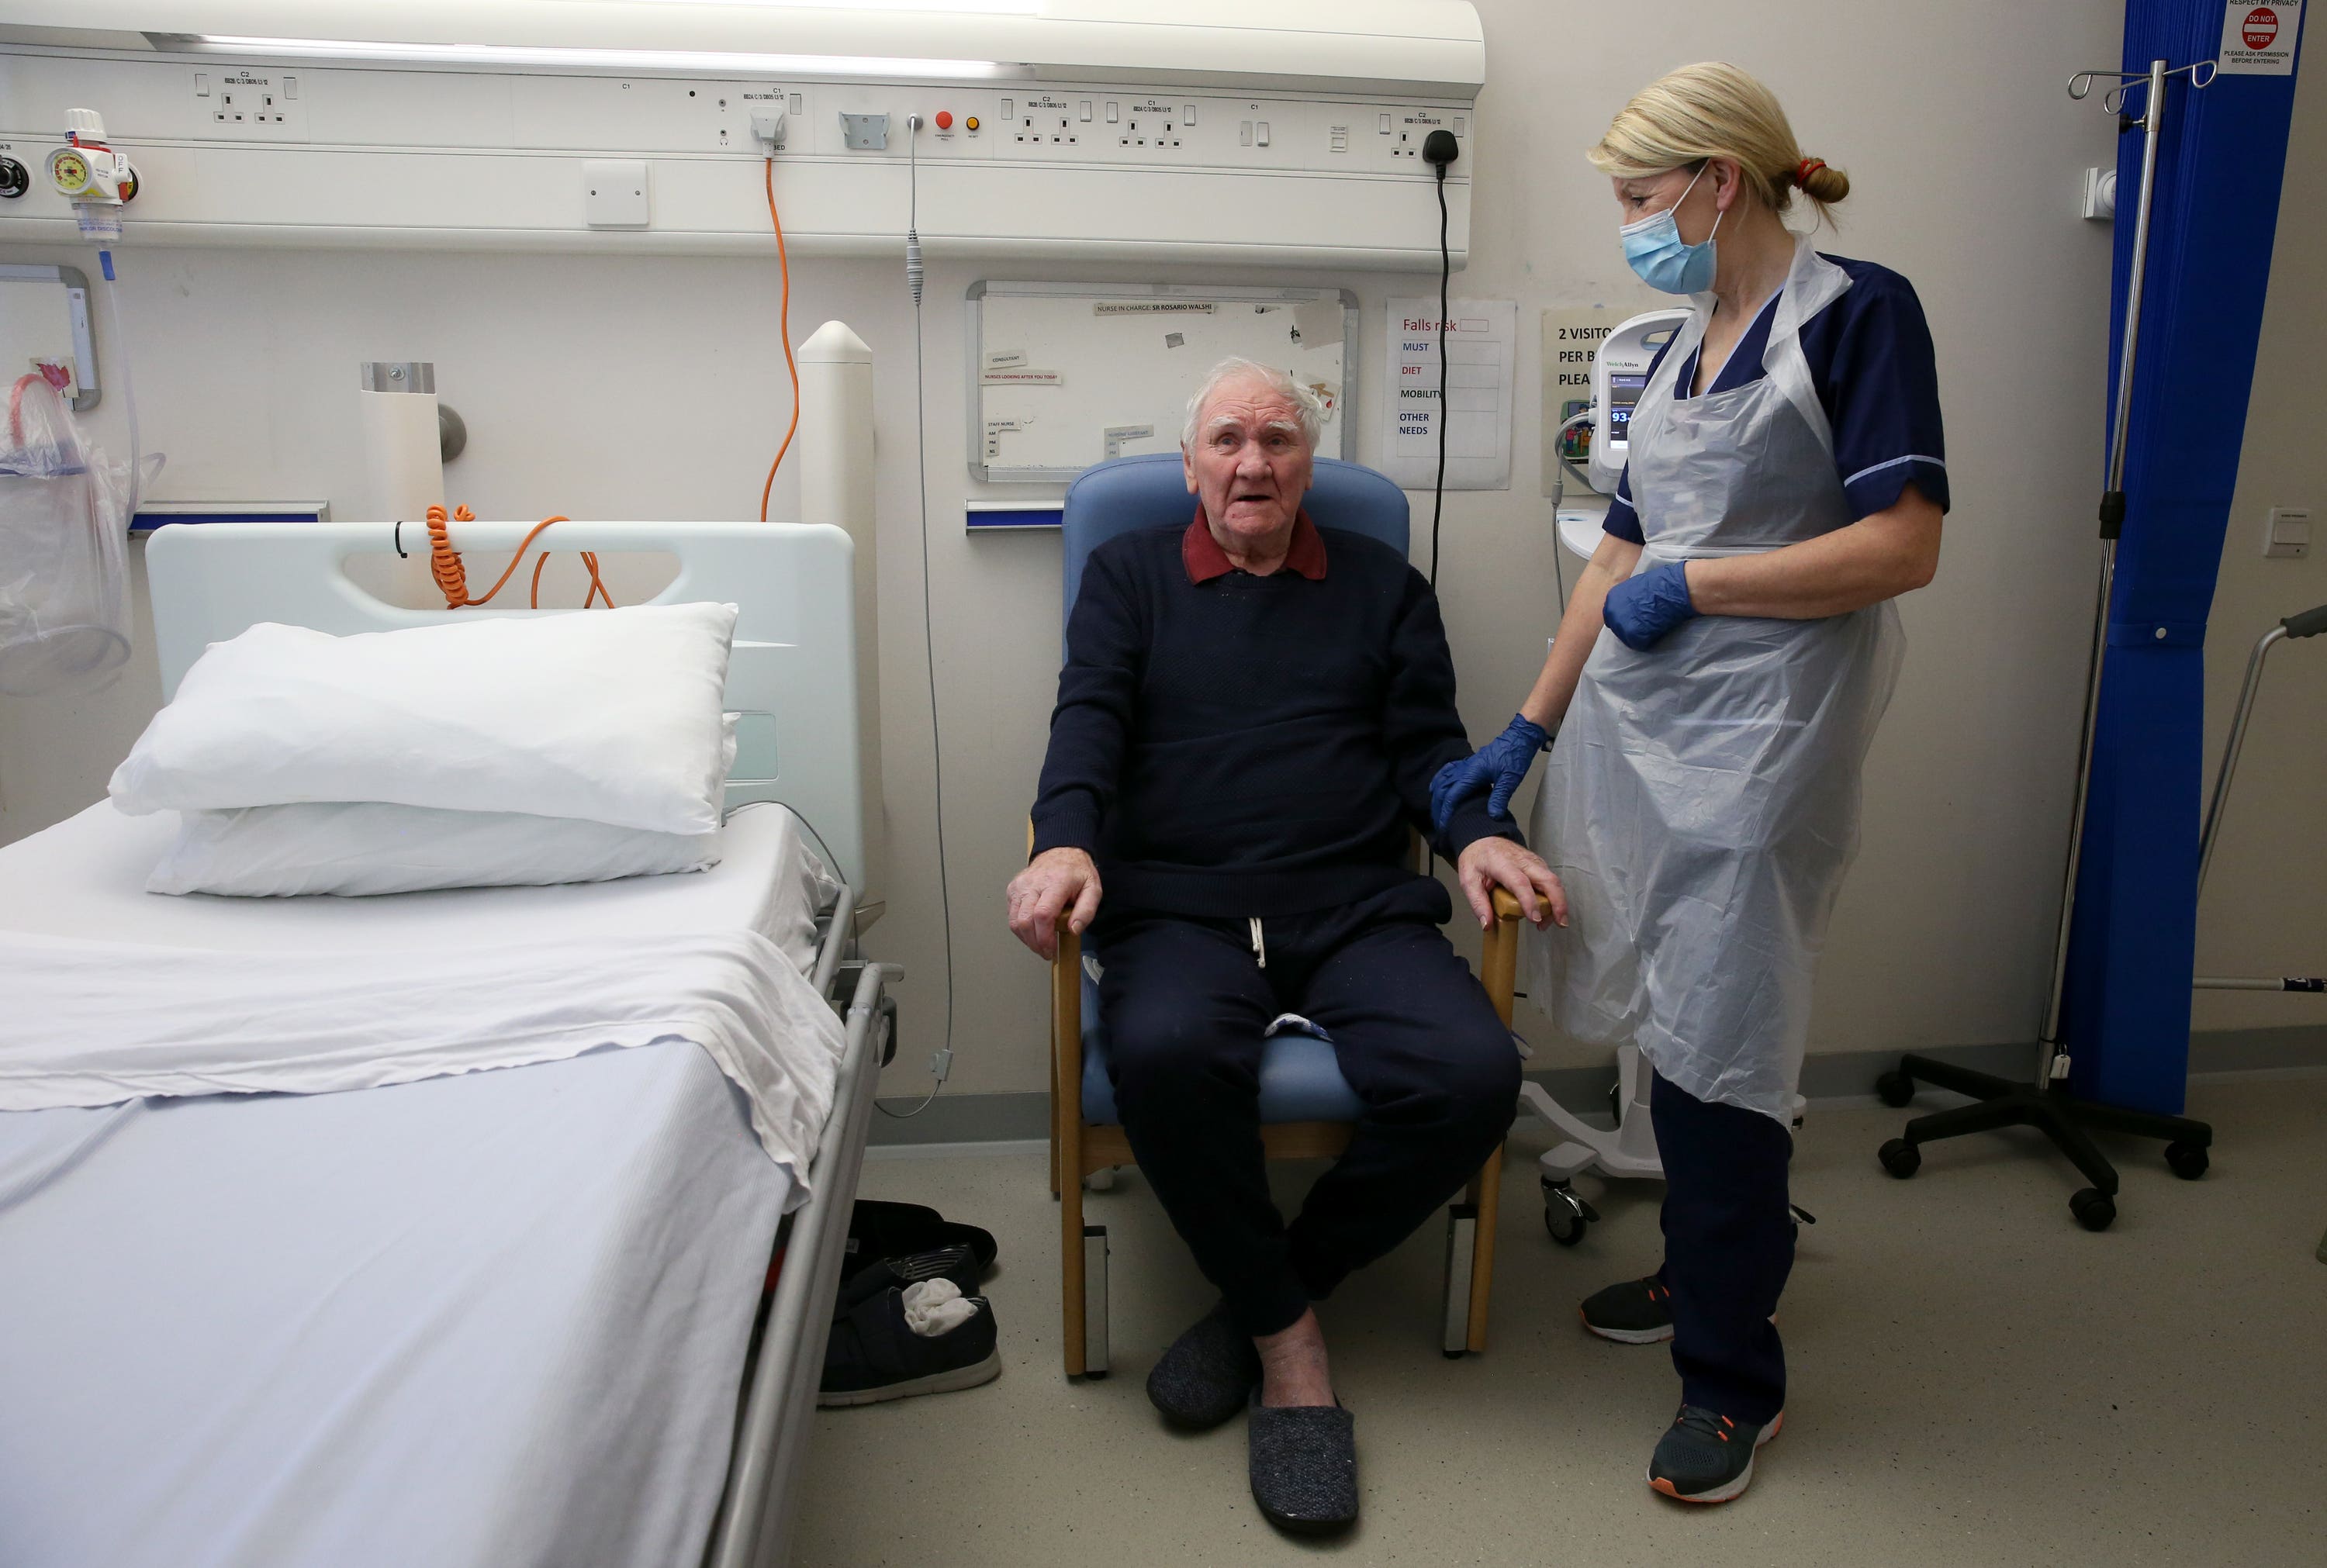 Mr Tierney praised the care given by staff on the coronavirus ward (Andrew Milligan/PA)